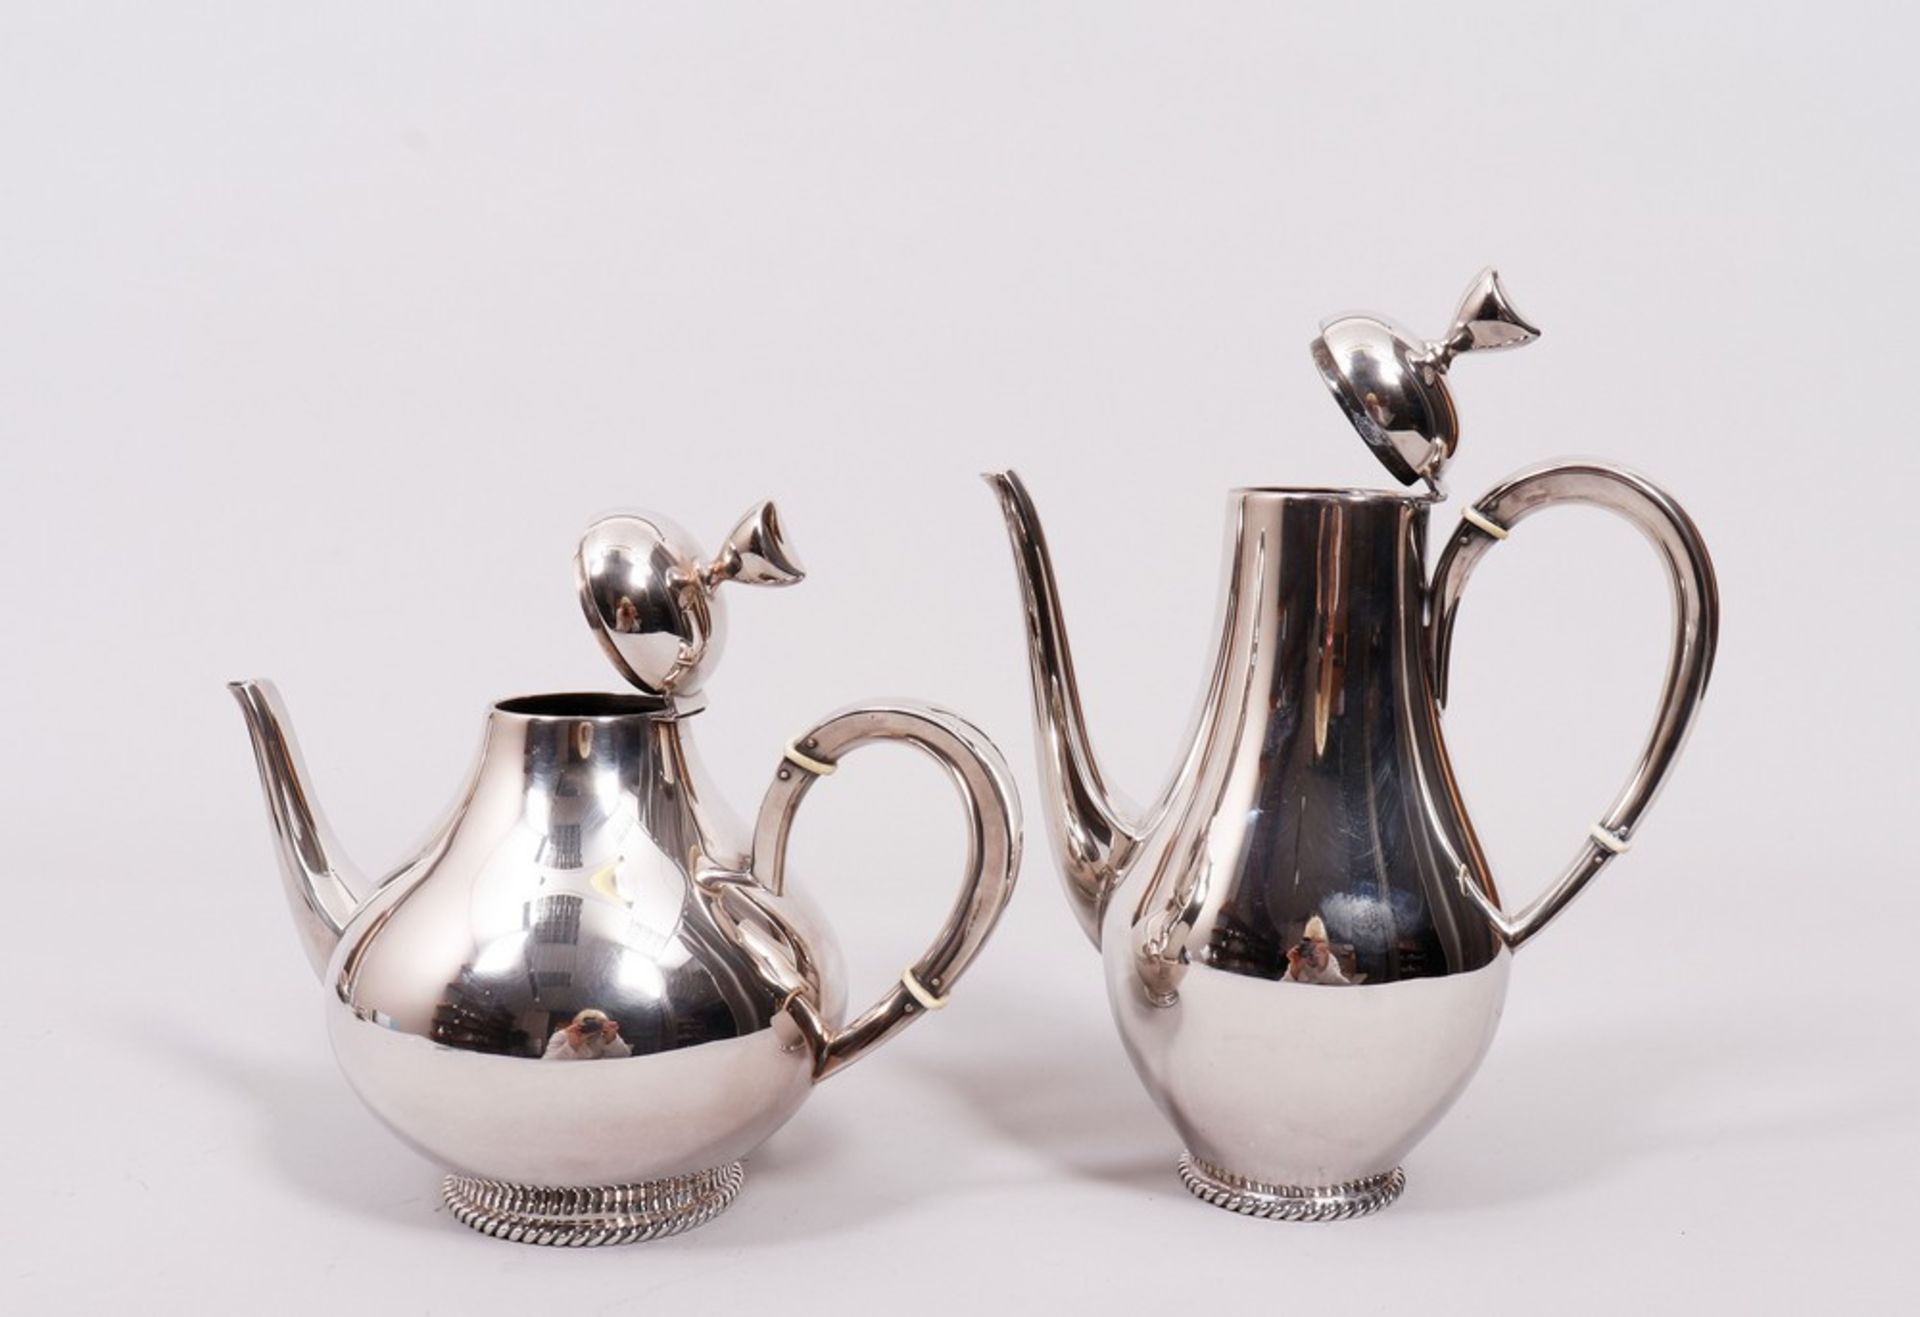 Coffee and tea pot, 925 silver, Wilkens, mid 20th C. - Image 2 of 3